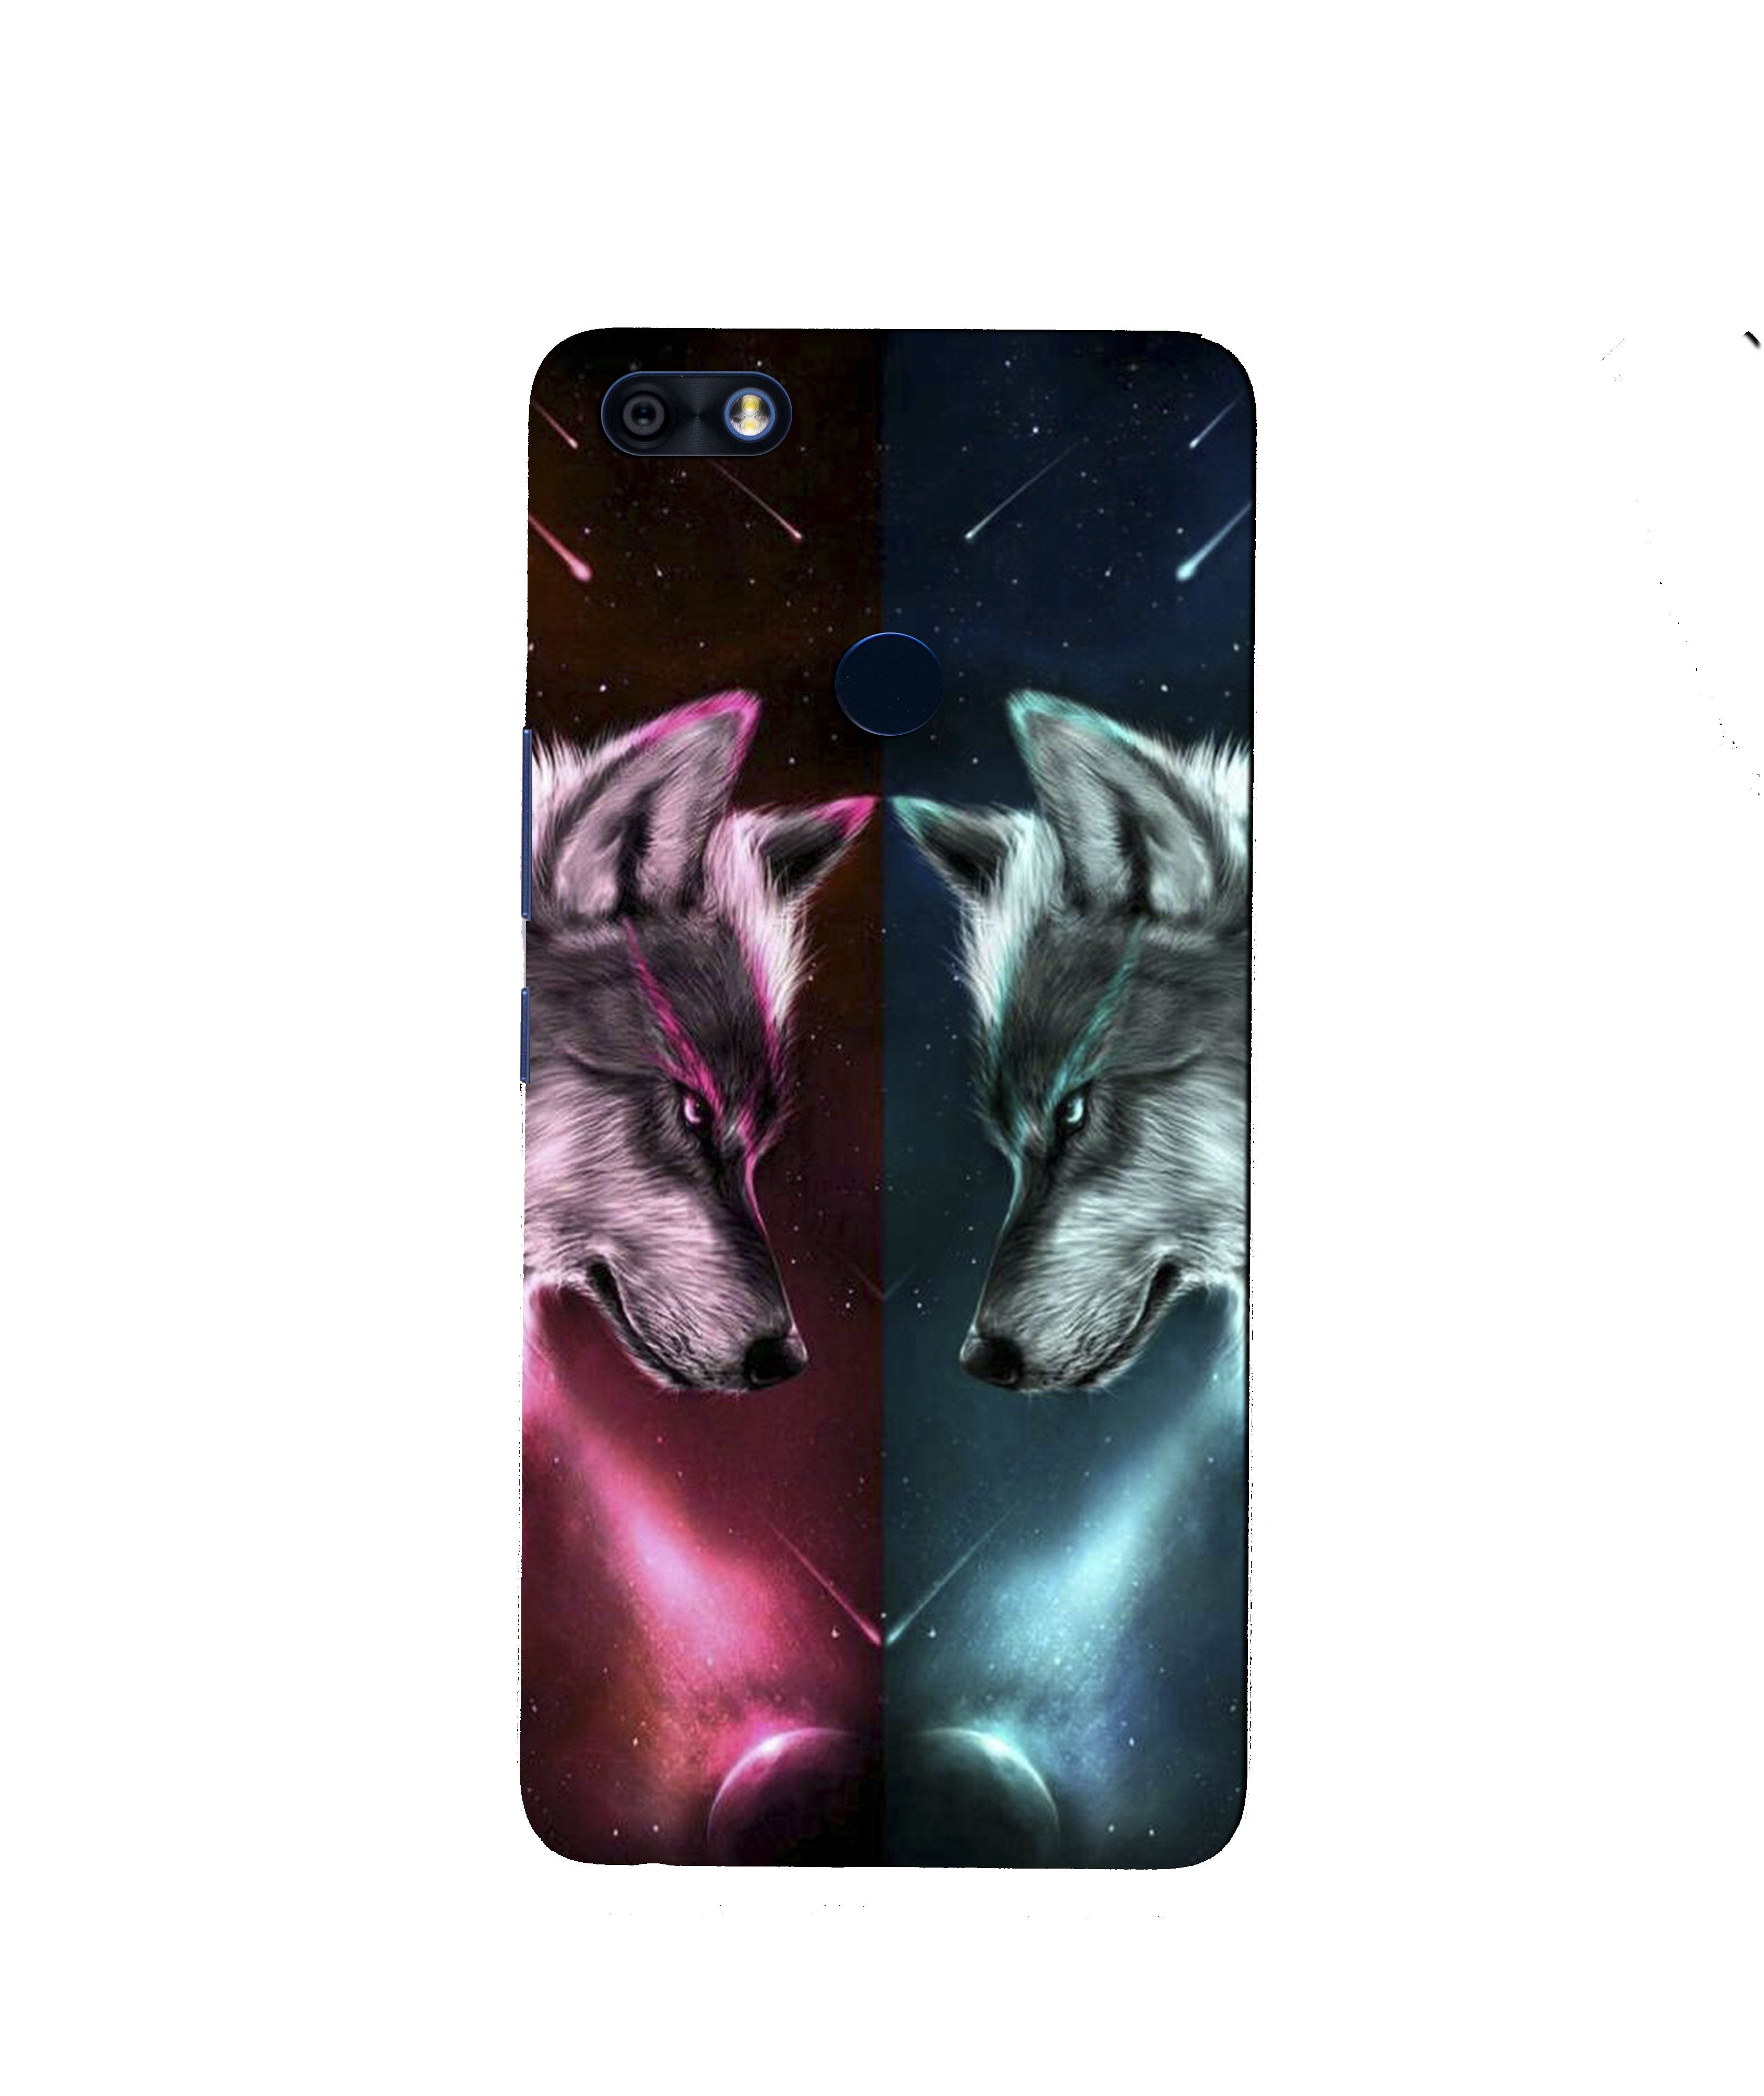 Wolf fight Case for Infinix Note 5 / Note 5 Pro (Design No. 221)